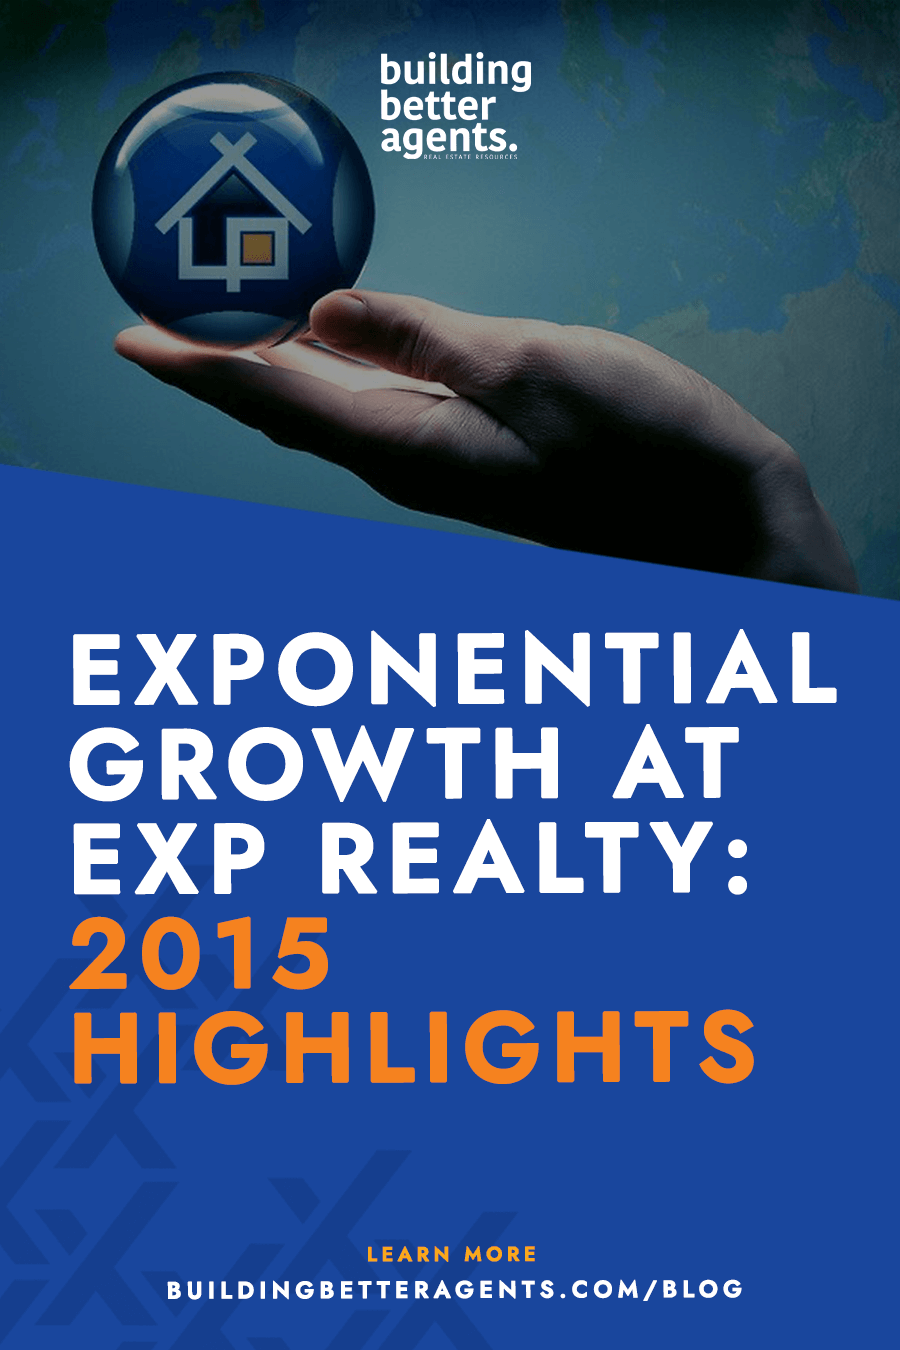 EXPonential Growth at eXp Realty